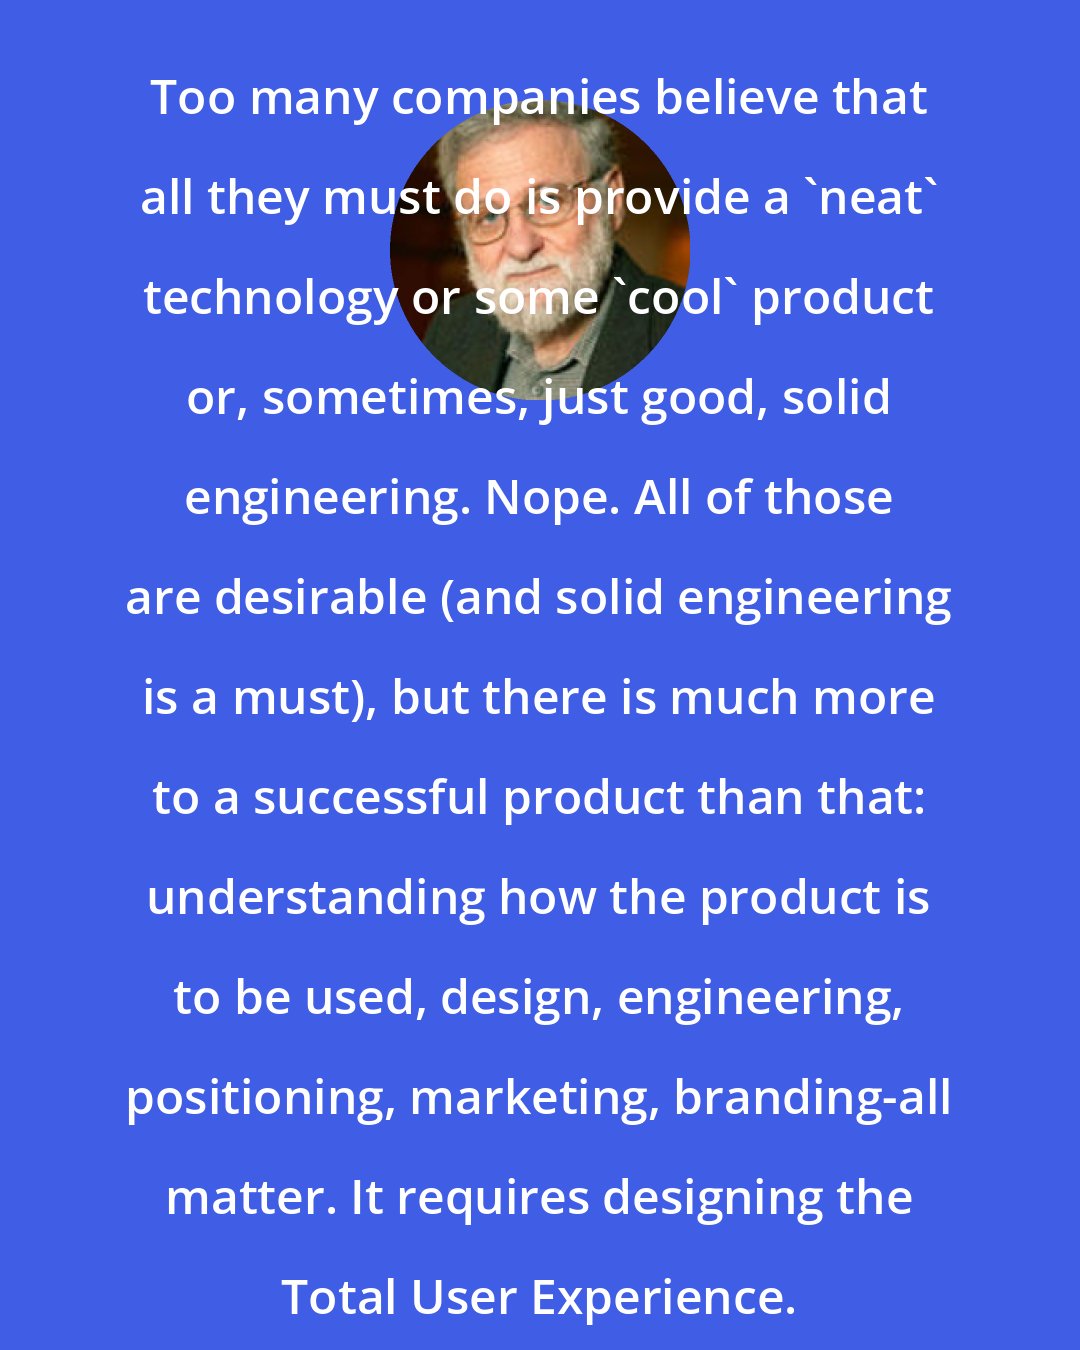 Donald A. Norman: Too many companies believe that all they must do is provide a 'neat' technology or some 'cool' product or, sometimes, just good, solid engineering. Nope. All of those are desirable (and solid engineering is a must), but there is much more to a successful product than that: understanding how the product is to be used, design, engineering, positioning, marketing, branding-all matter. It requires designing the Total User Experience.